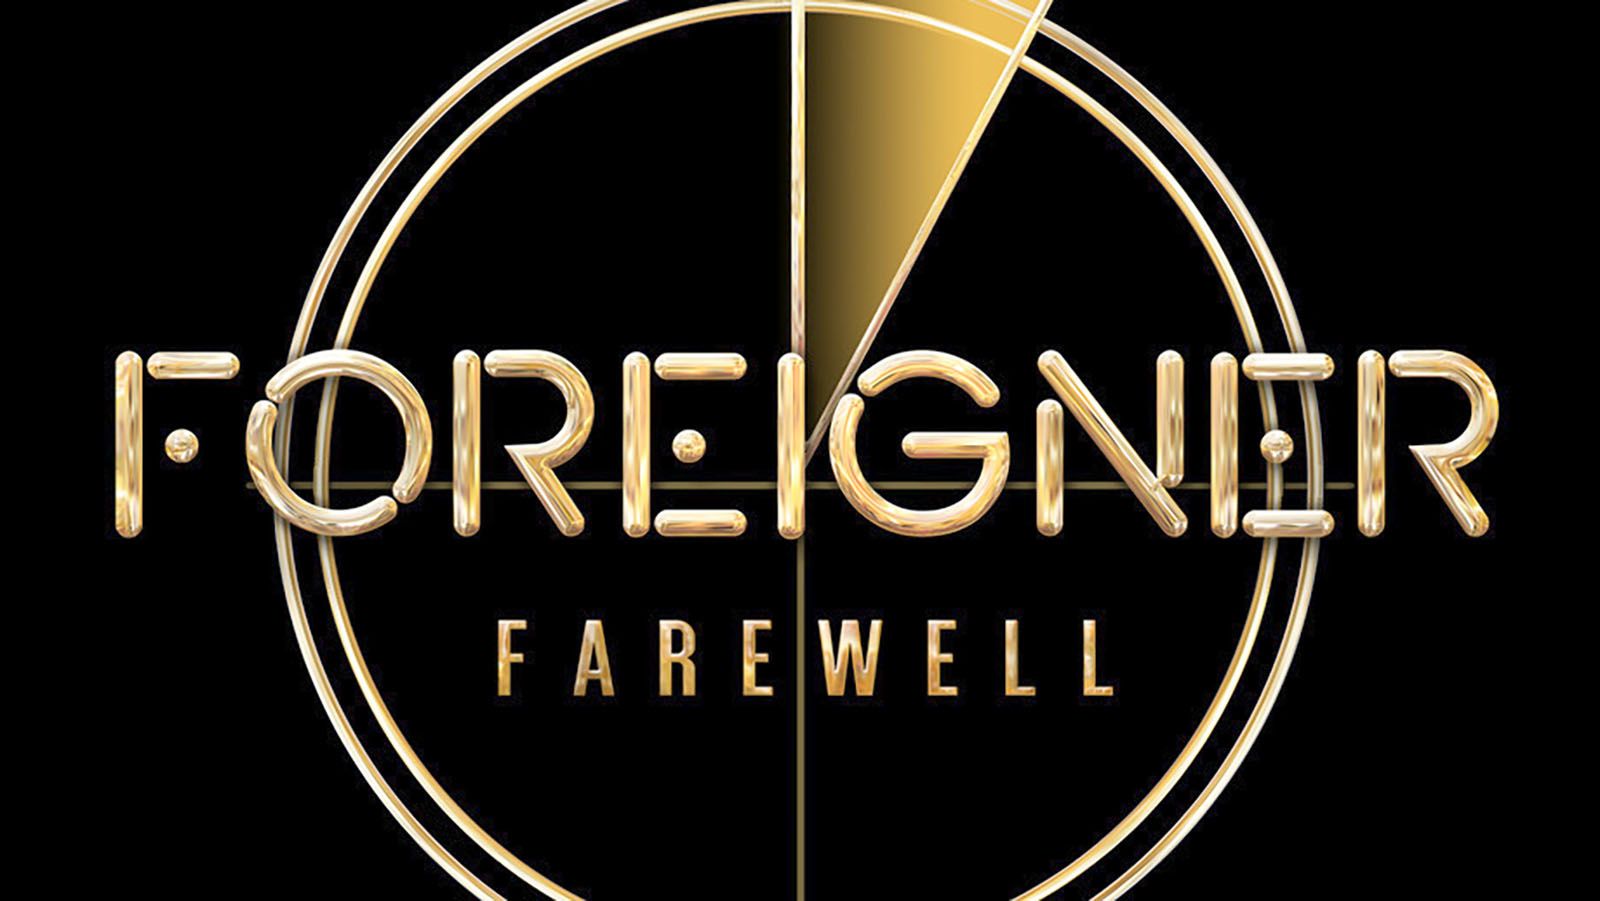 Foreigner will be at Memorial Coliseum on Oct. 24.